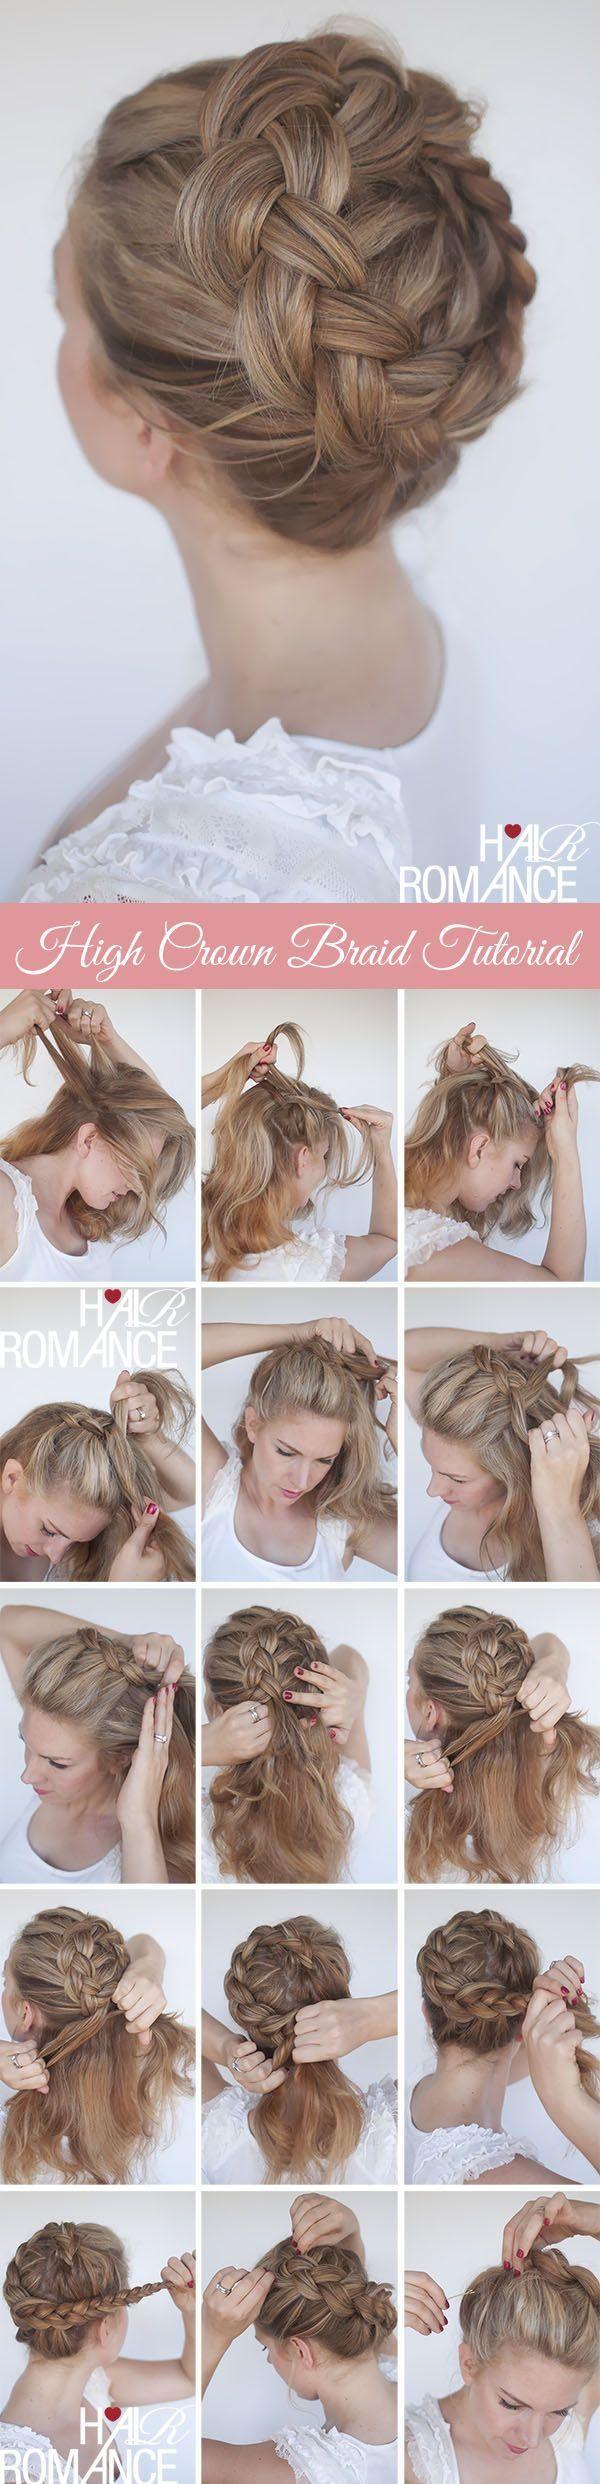 Mariage - 15 Braided Hairstyles That Will Look Amazing With Your Prom Dress